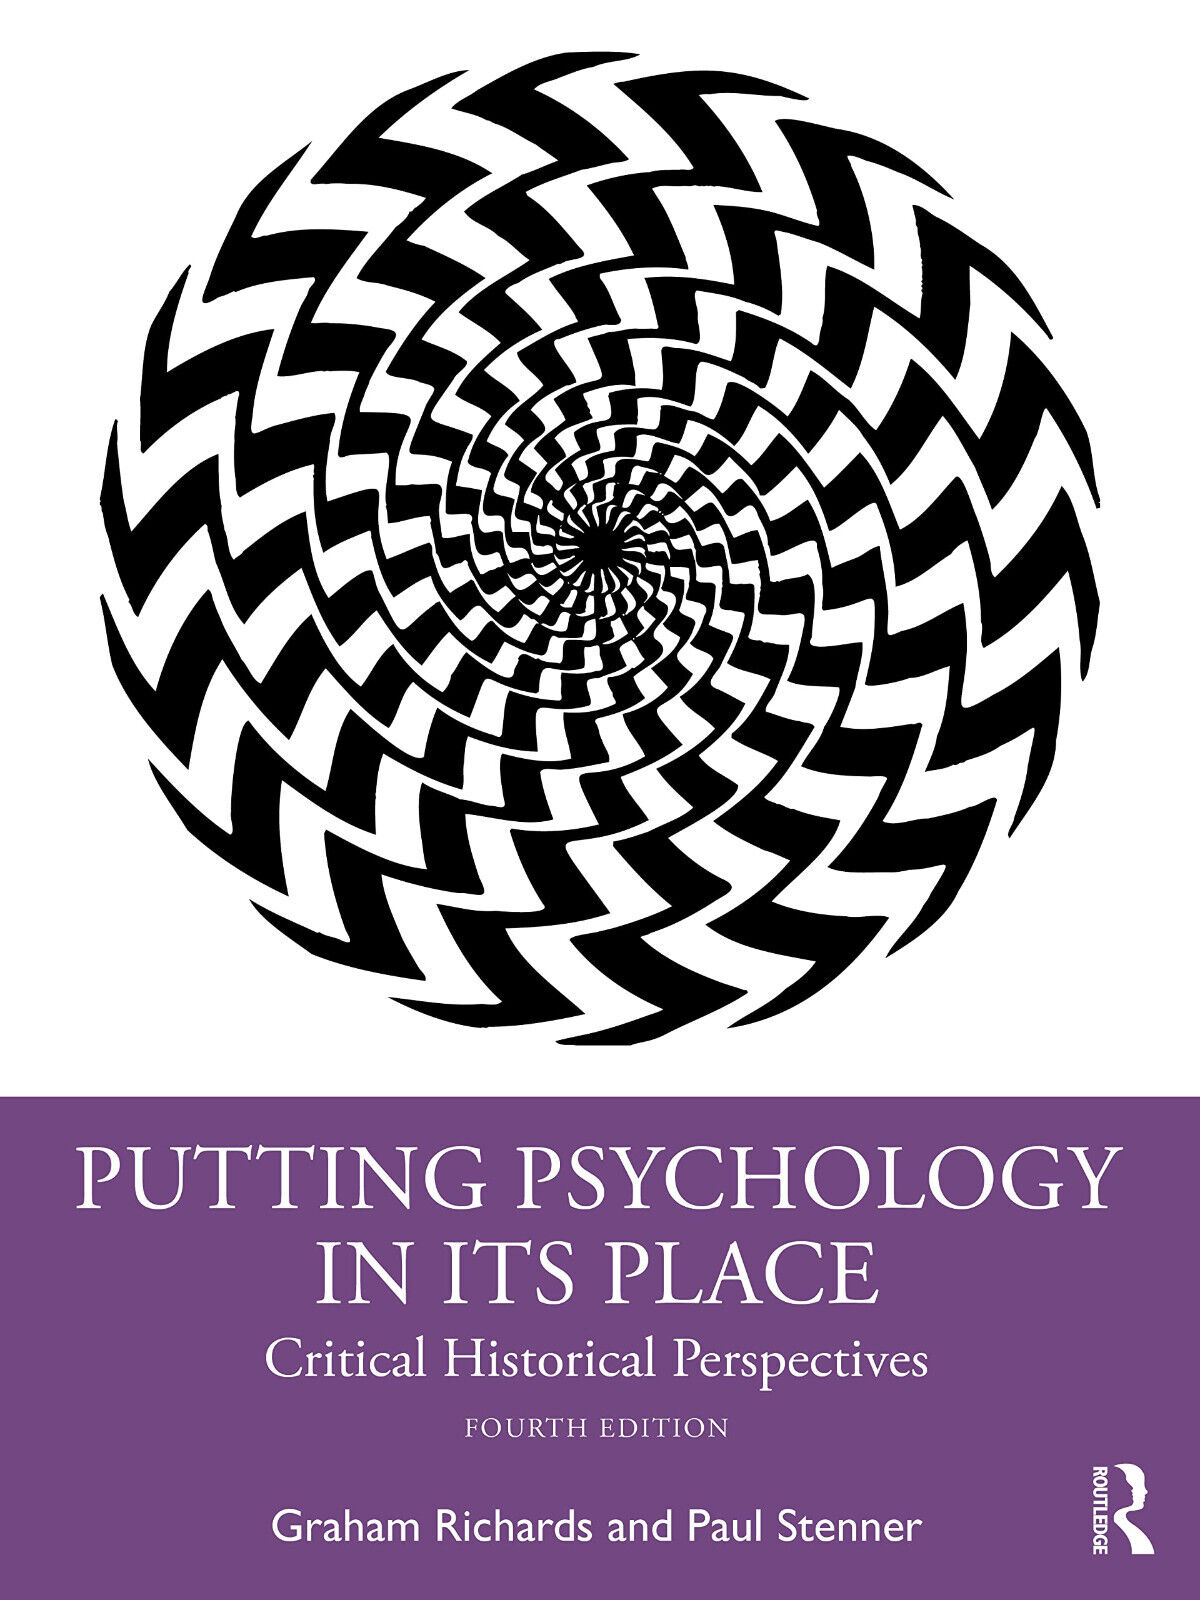 Putting Psychology In Its Place - Graham Richards, Paul Stenner - 2022